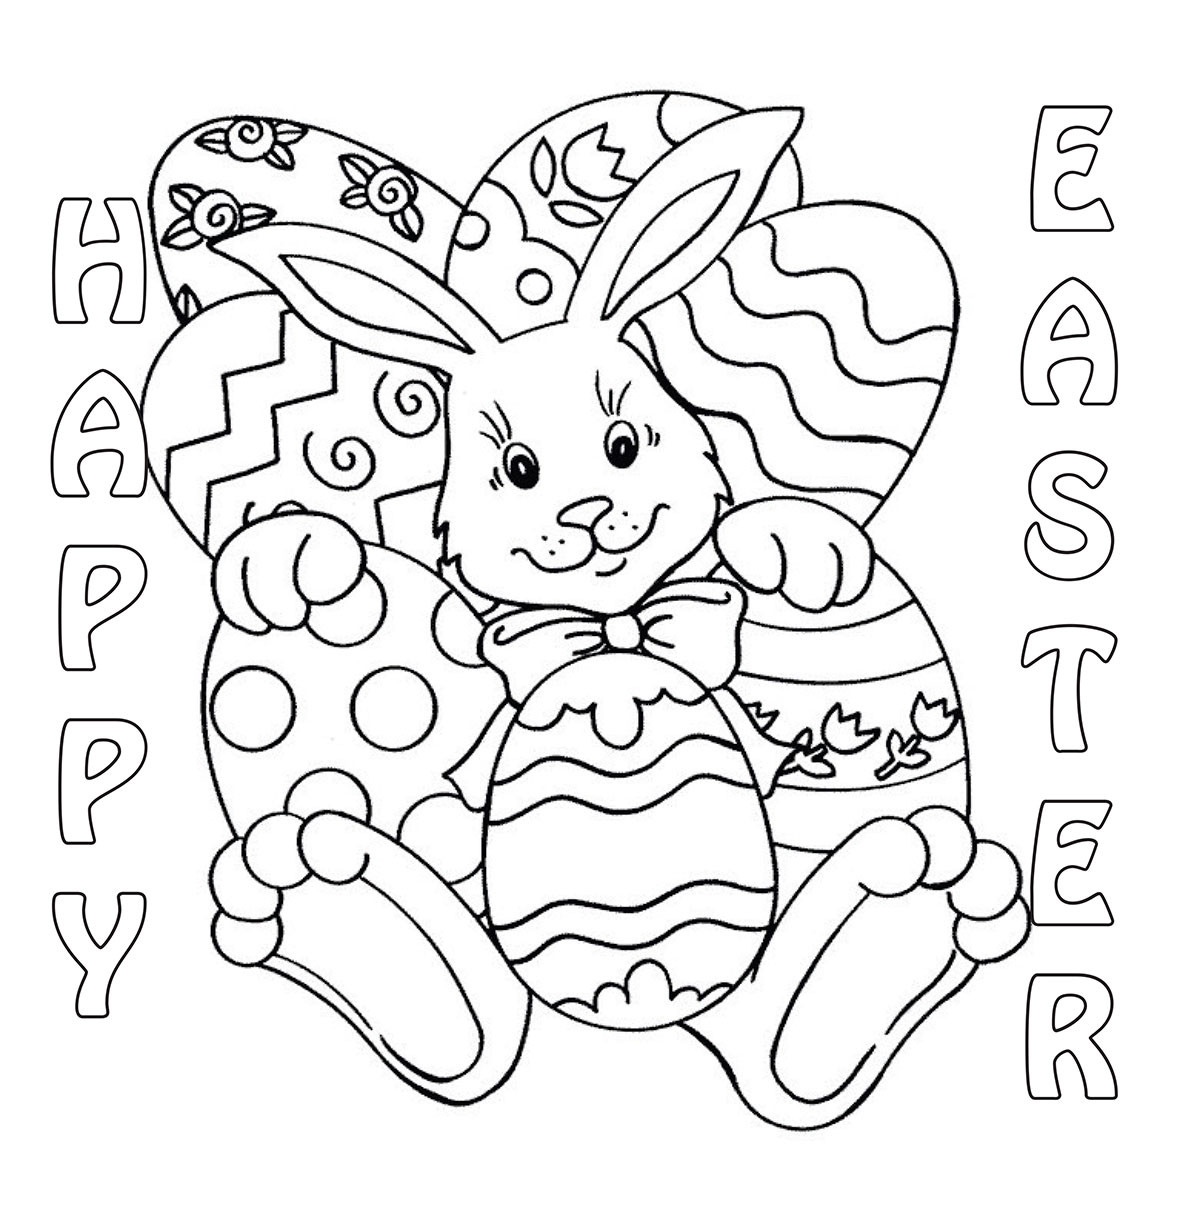 Printable Coloring Pages For Easter
 Easter Coloring Contest 2014